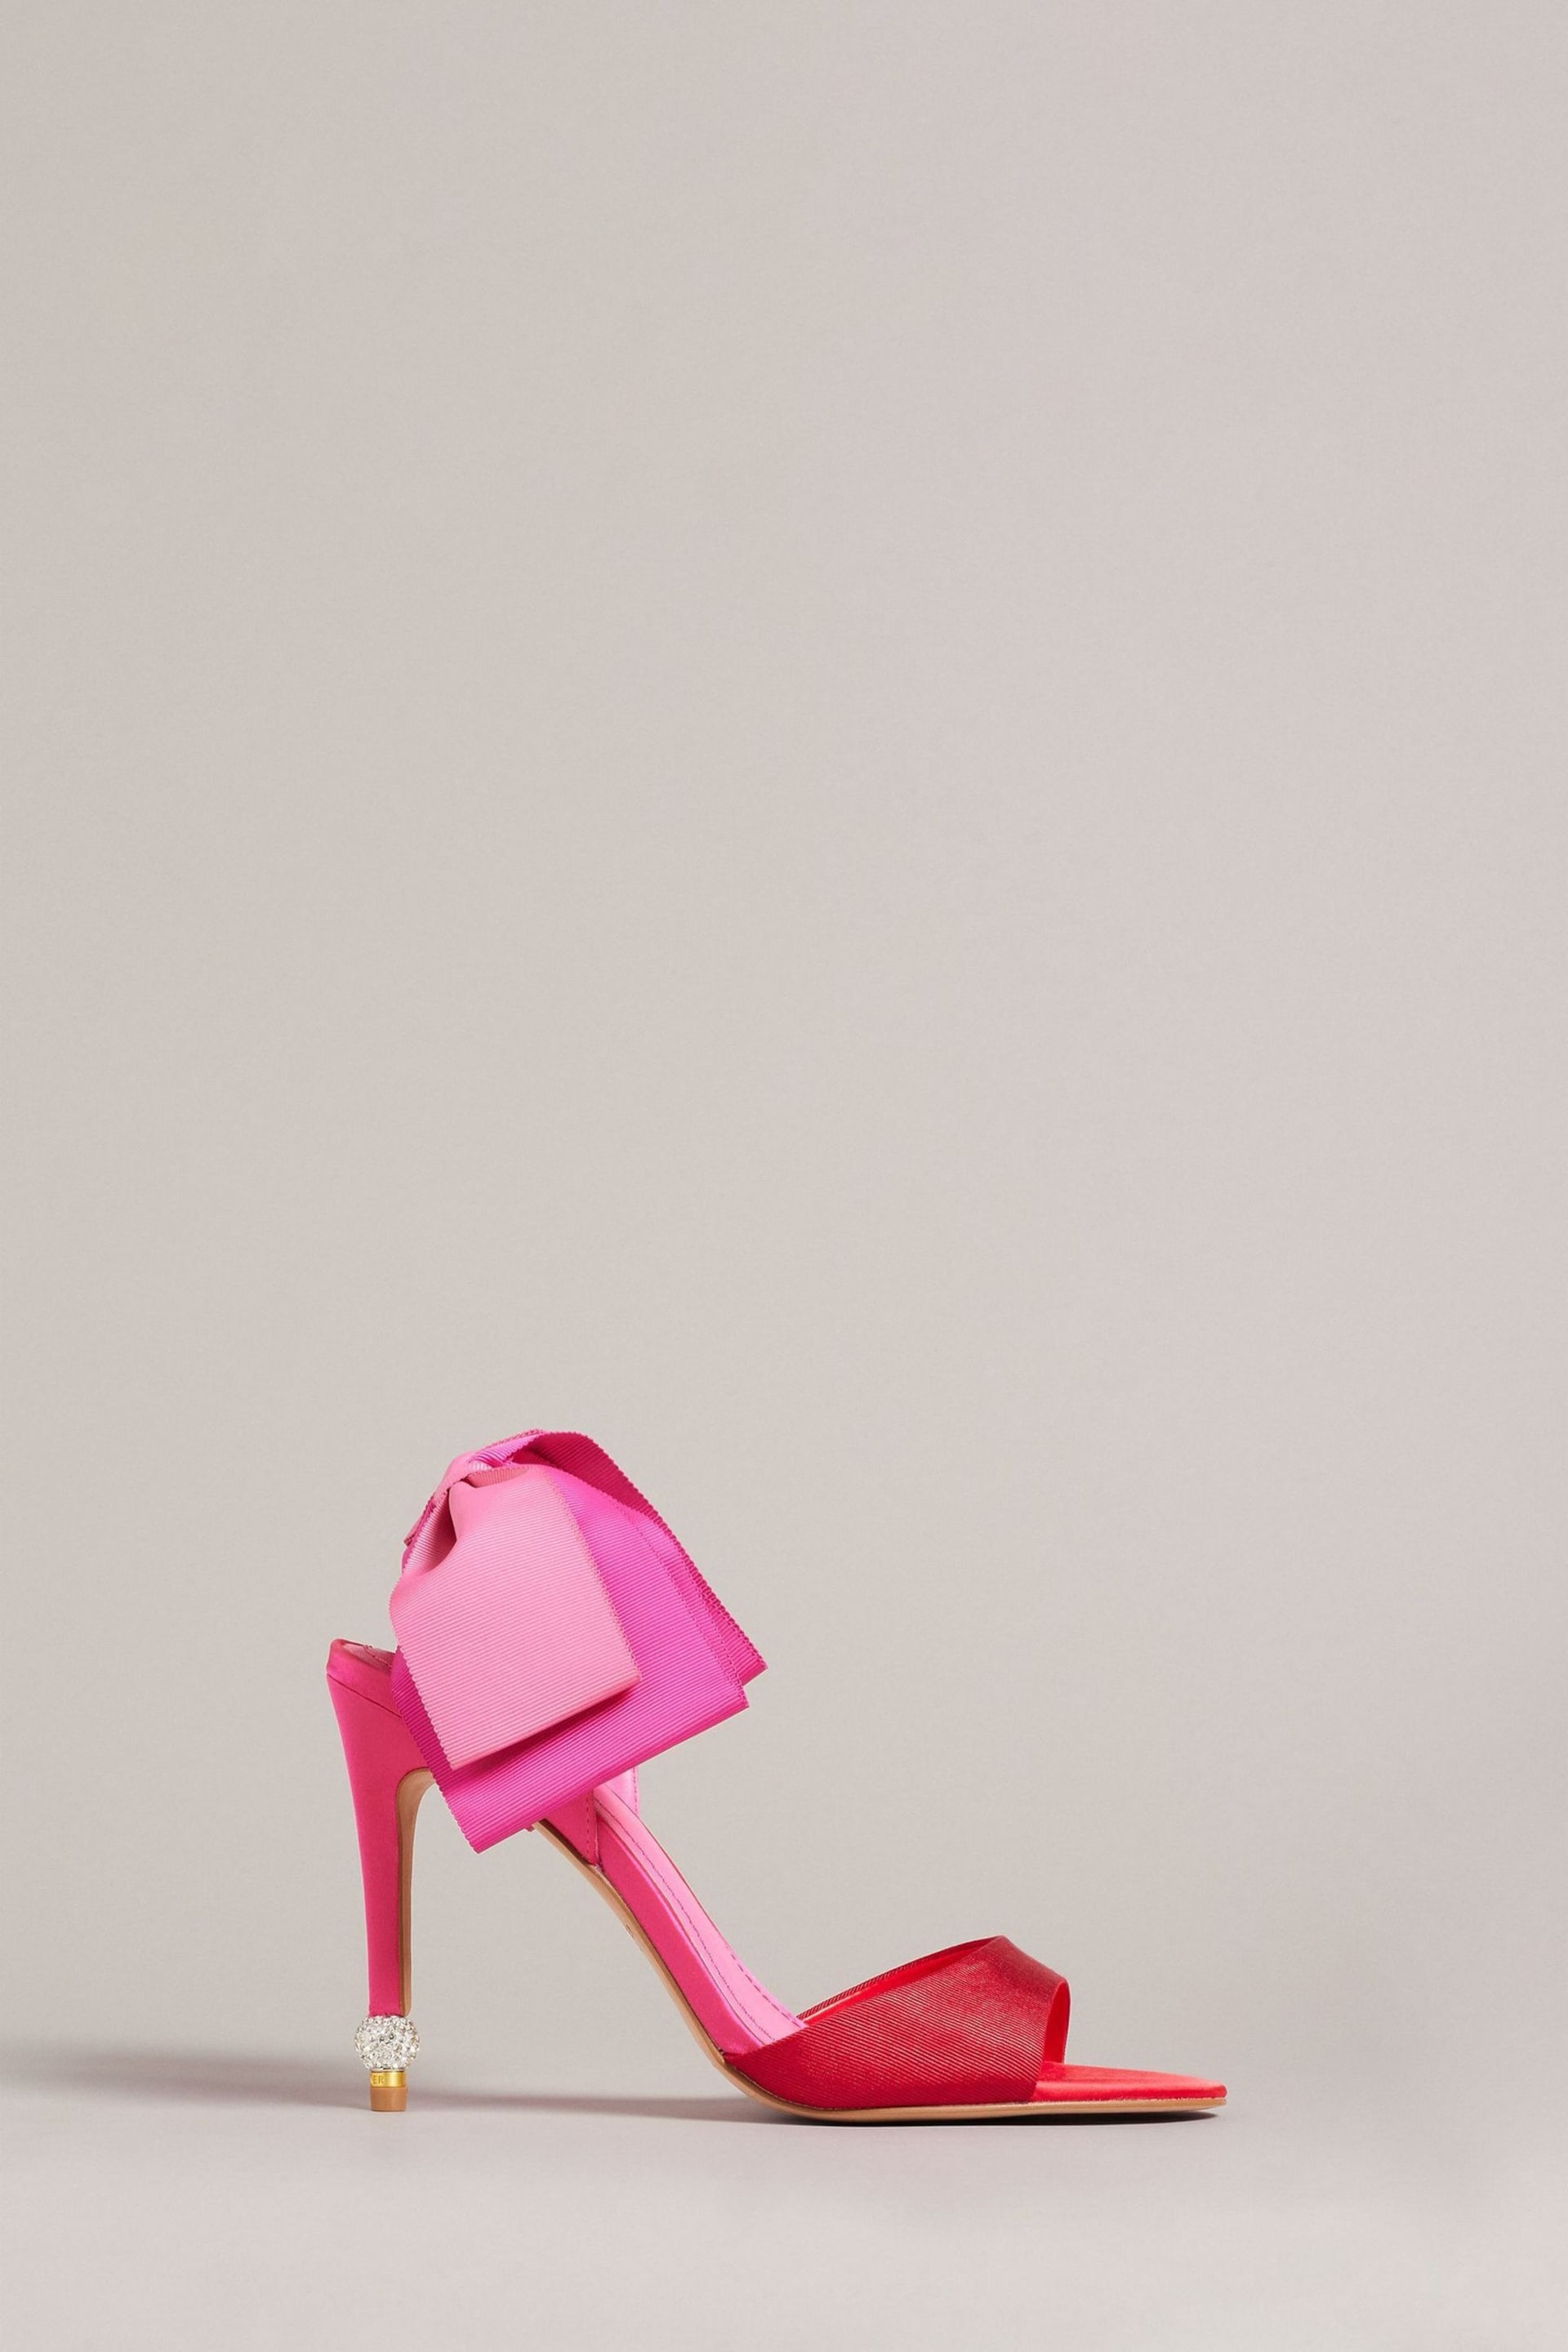 Ted Baker Pink Harinas Oversized Bow Back Sandals - Image 1 of 5